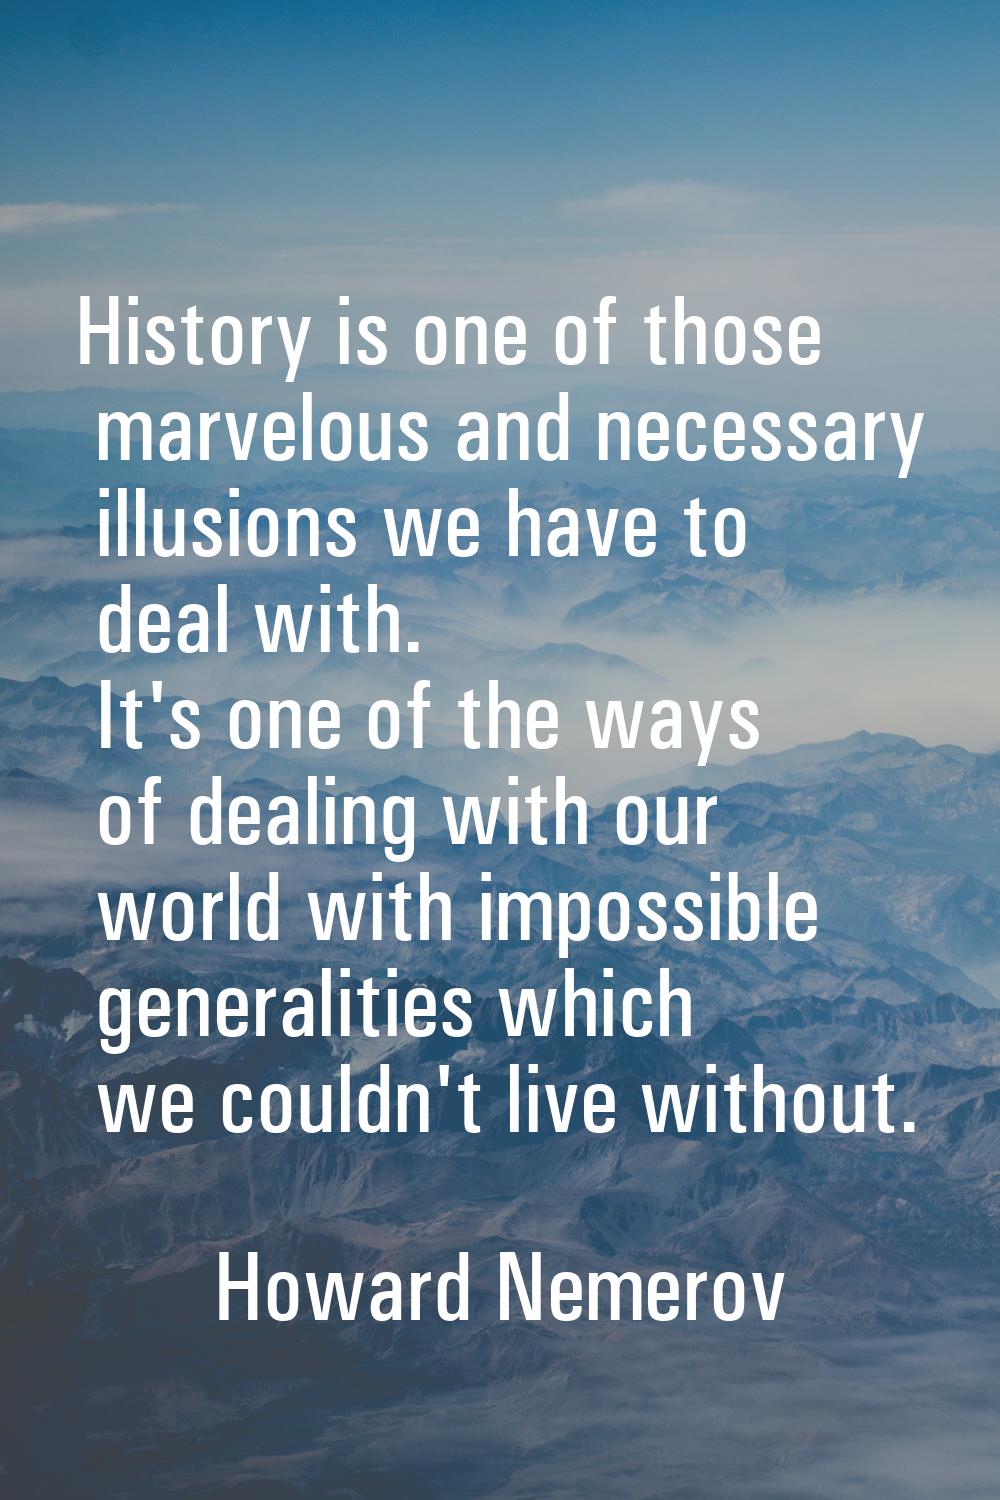 History is one of those marvelous and necessary illusions we have to deal with. It's one of the way